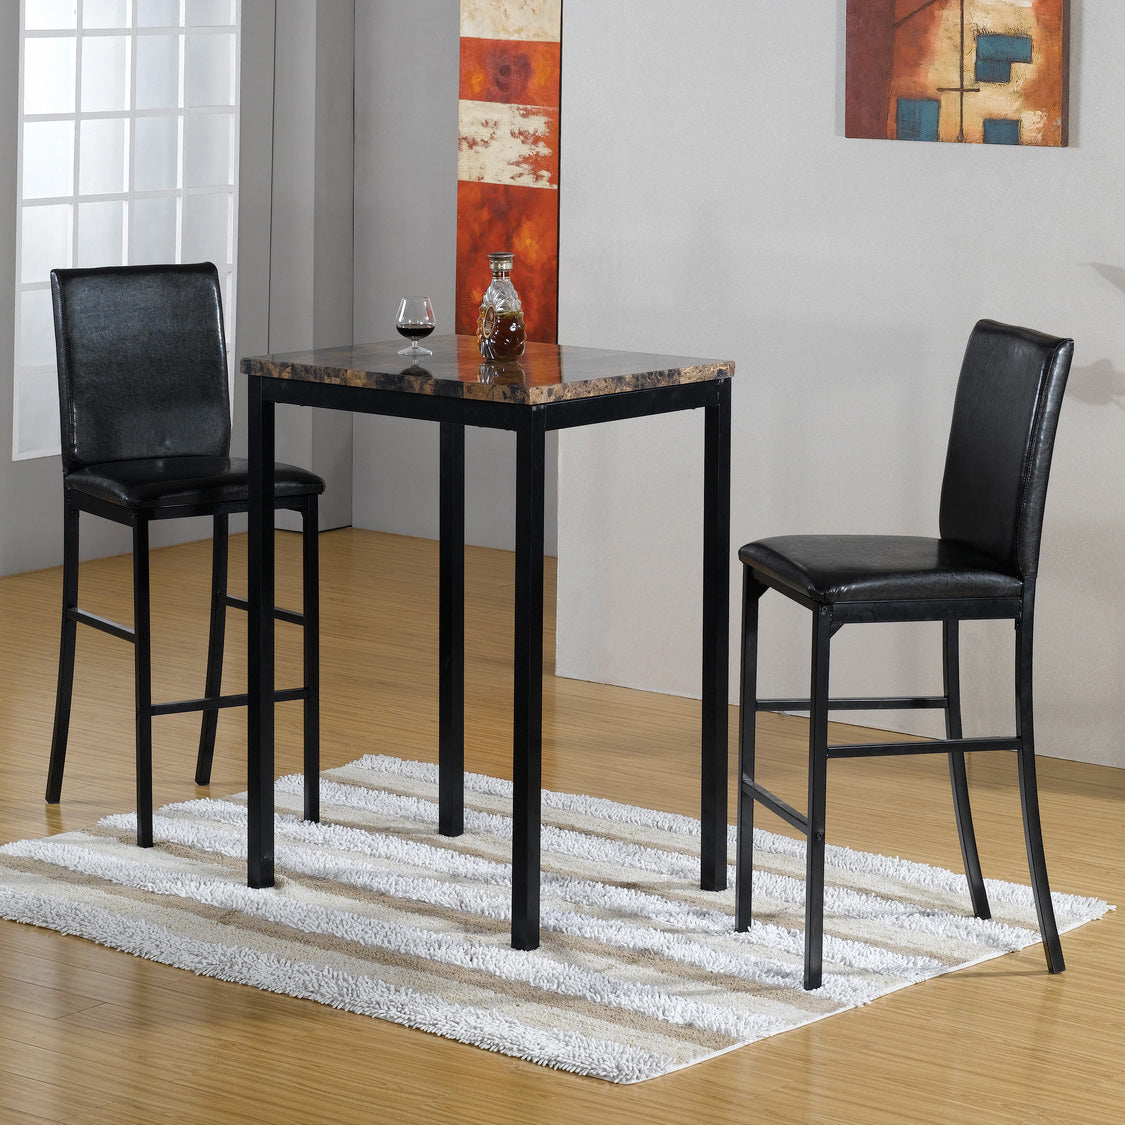 Tall Bistro Table And Chairs - Foter